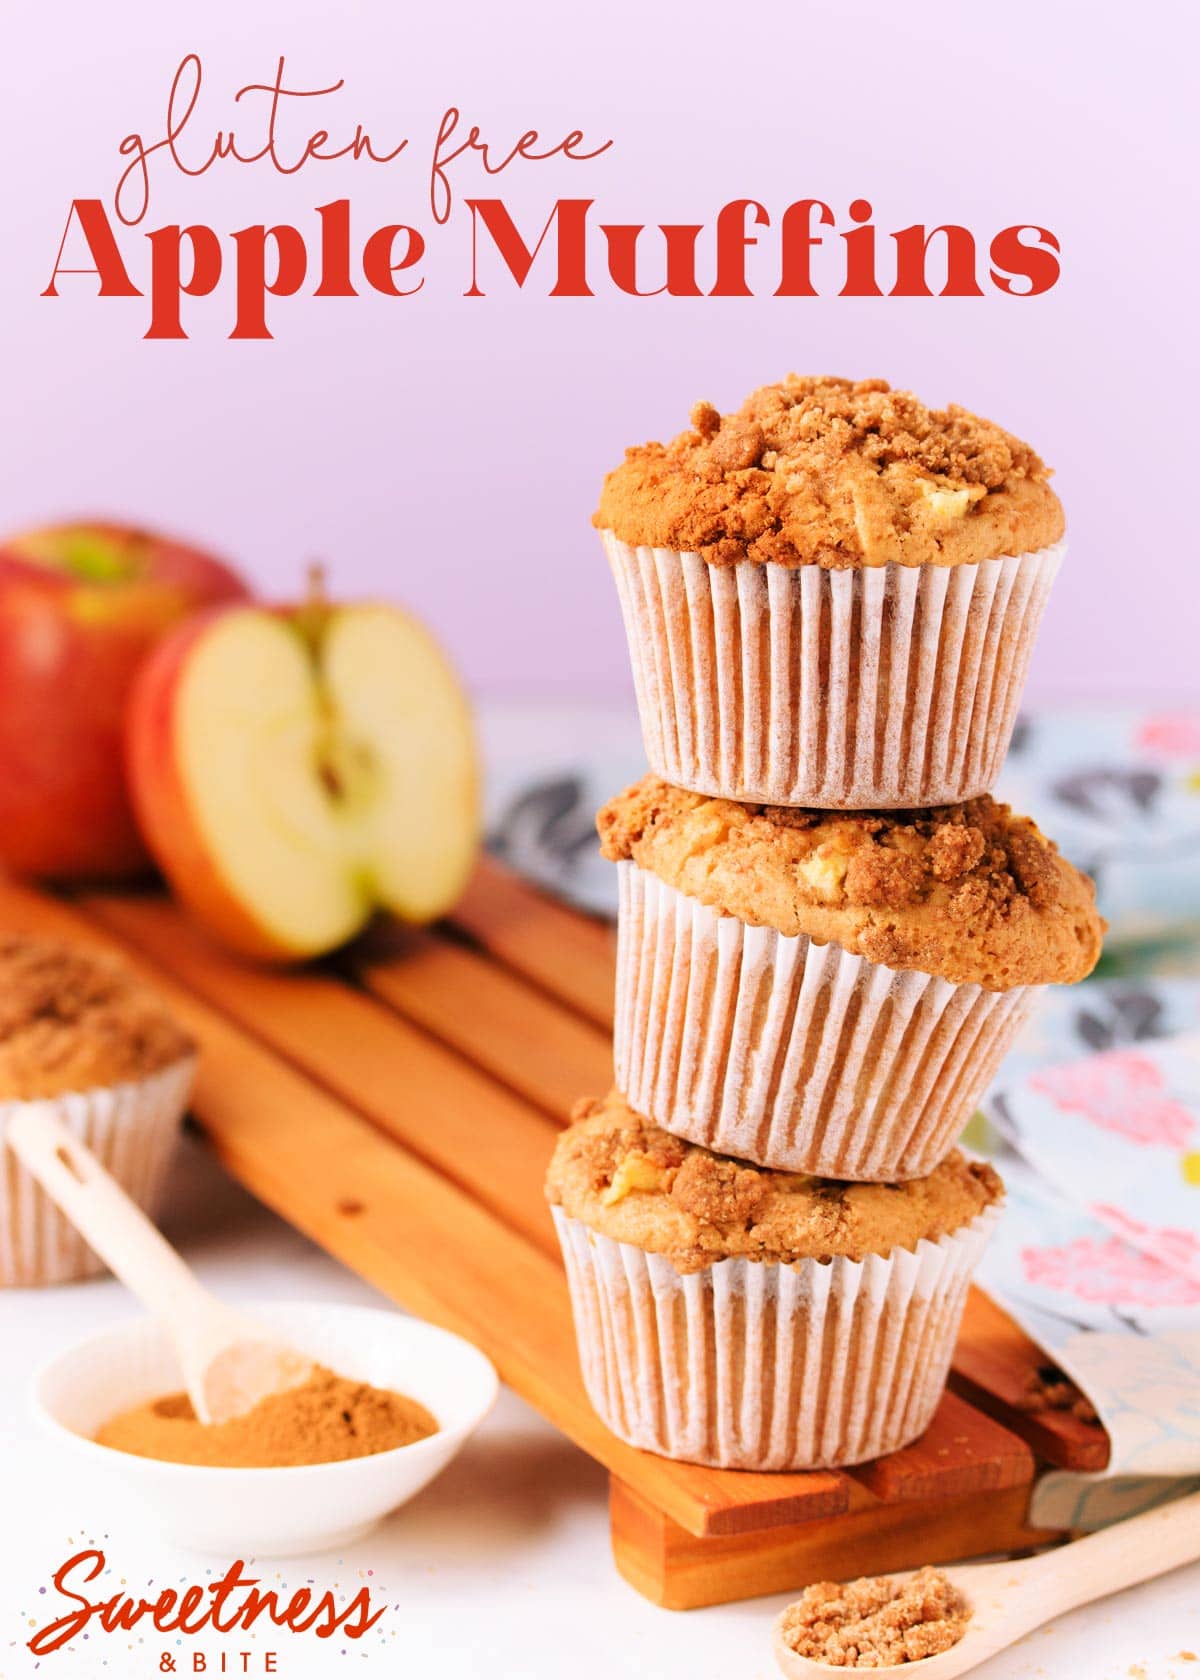 Three muffins stacked on top of each other, on a wooden board, with an apple and small dish of cinnamon in the background, text overlay reads 